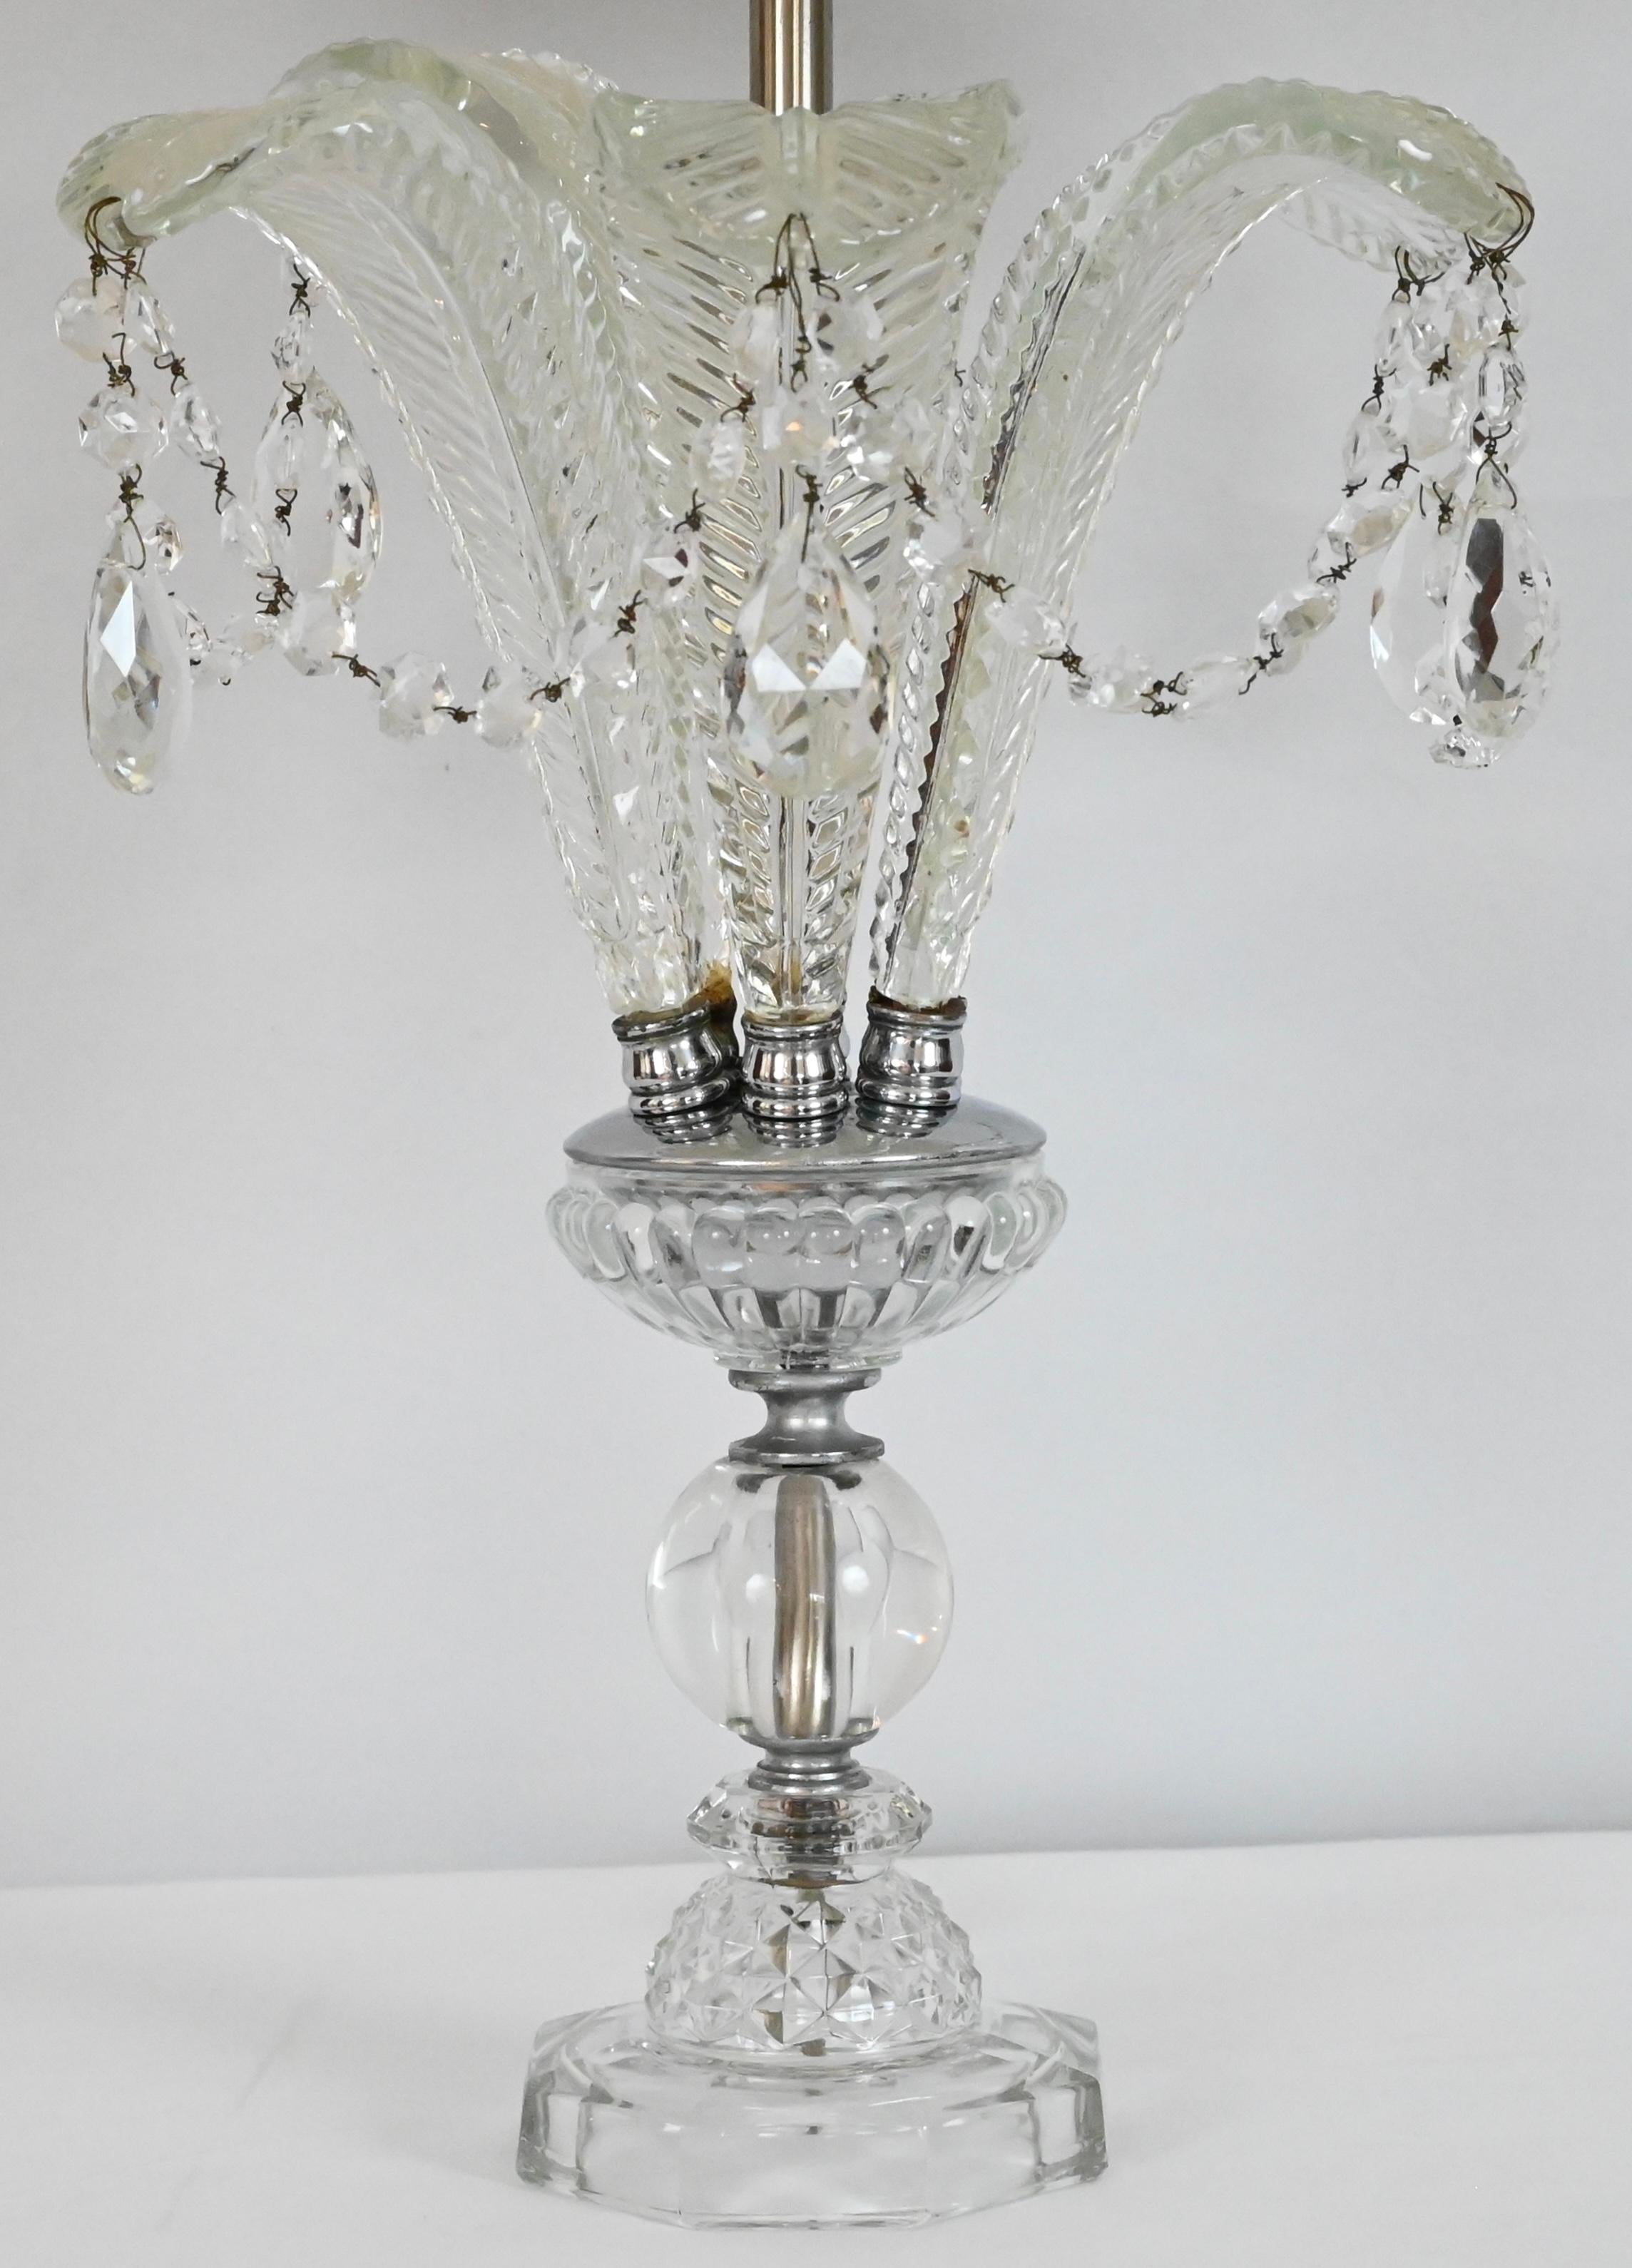 A wonderful Pair of Hollywood Regency Style Cut Crystal Glass Fern Leaf Lamps with glass bases. These lamps have been completely cleaned and are in perfect working condition. The glass fern leaves are exquisitely detailed.

This pair of lamps, each